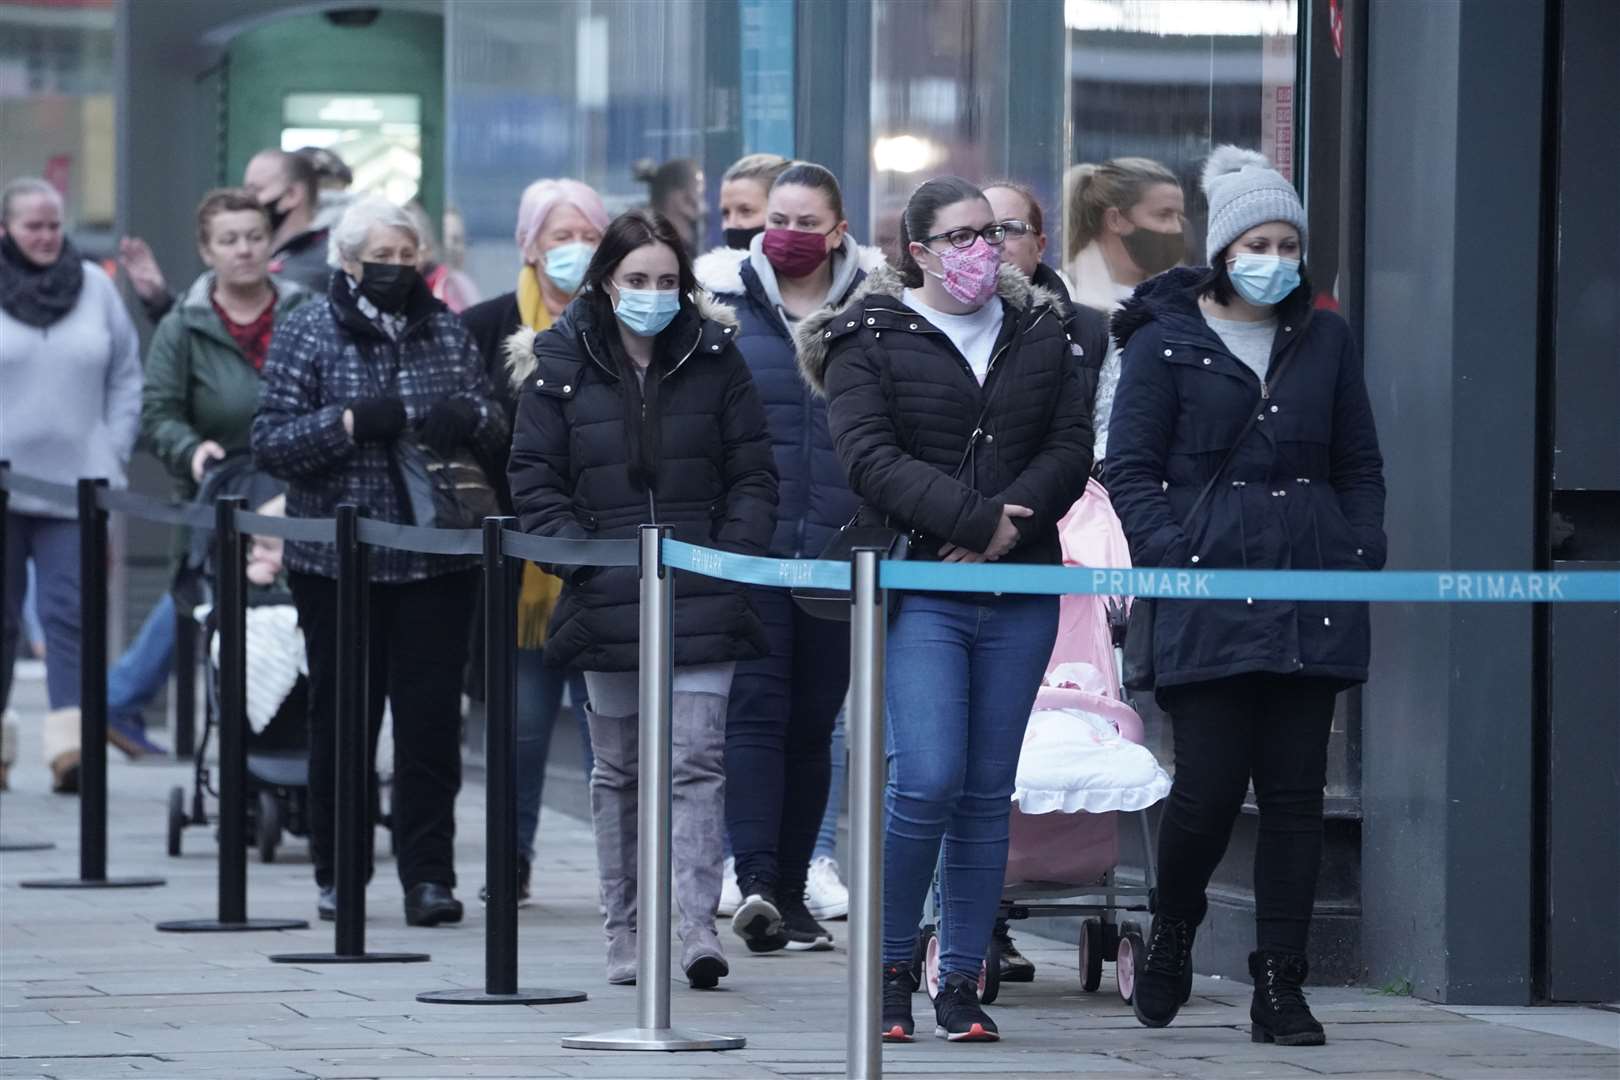 People queueing outside Primark in Northumberland Street, Newcastle (Owen Humphreys/PA)